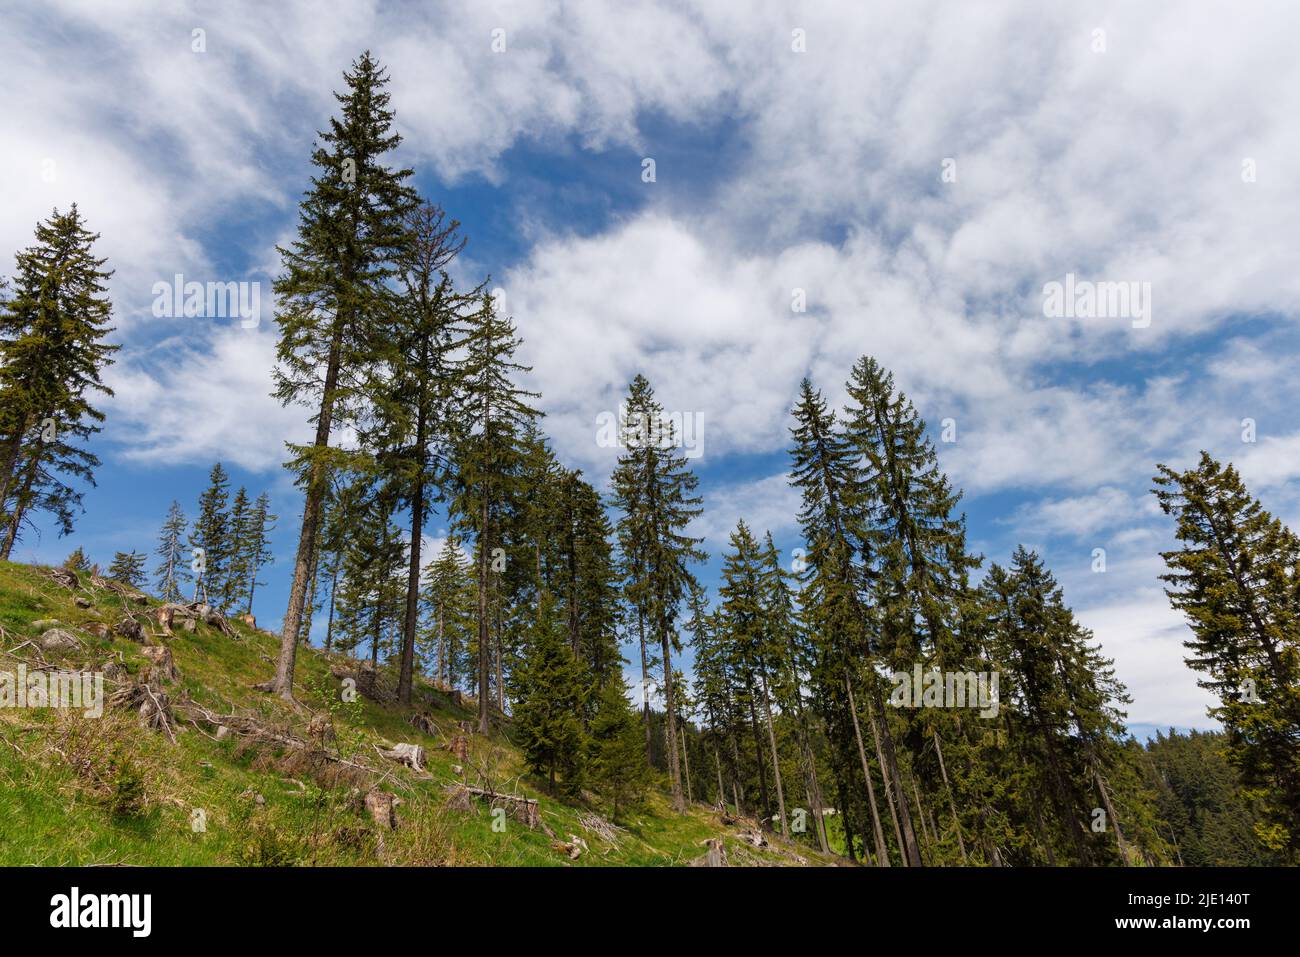 Wild bald empty forest with cut dry spruce trees and scattered abandoned broken branches and mountain green spring vegetation against a blue cloudy br Stock Photo